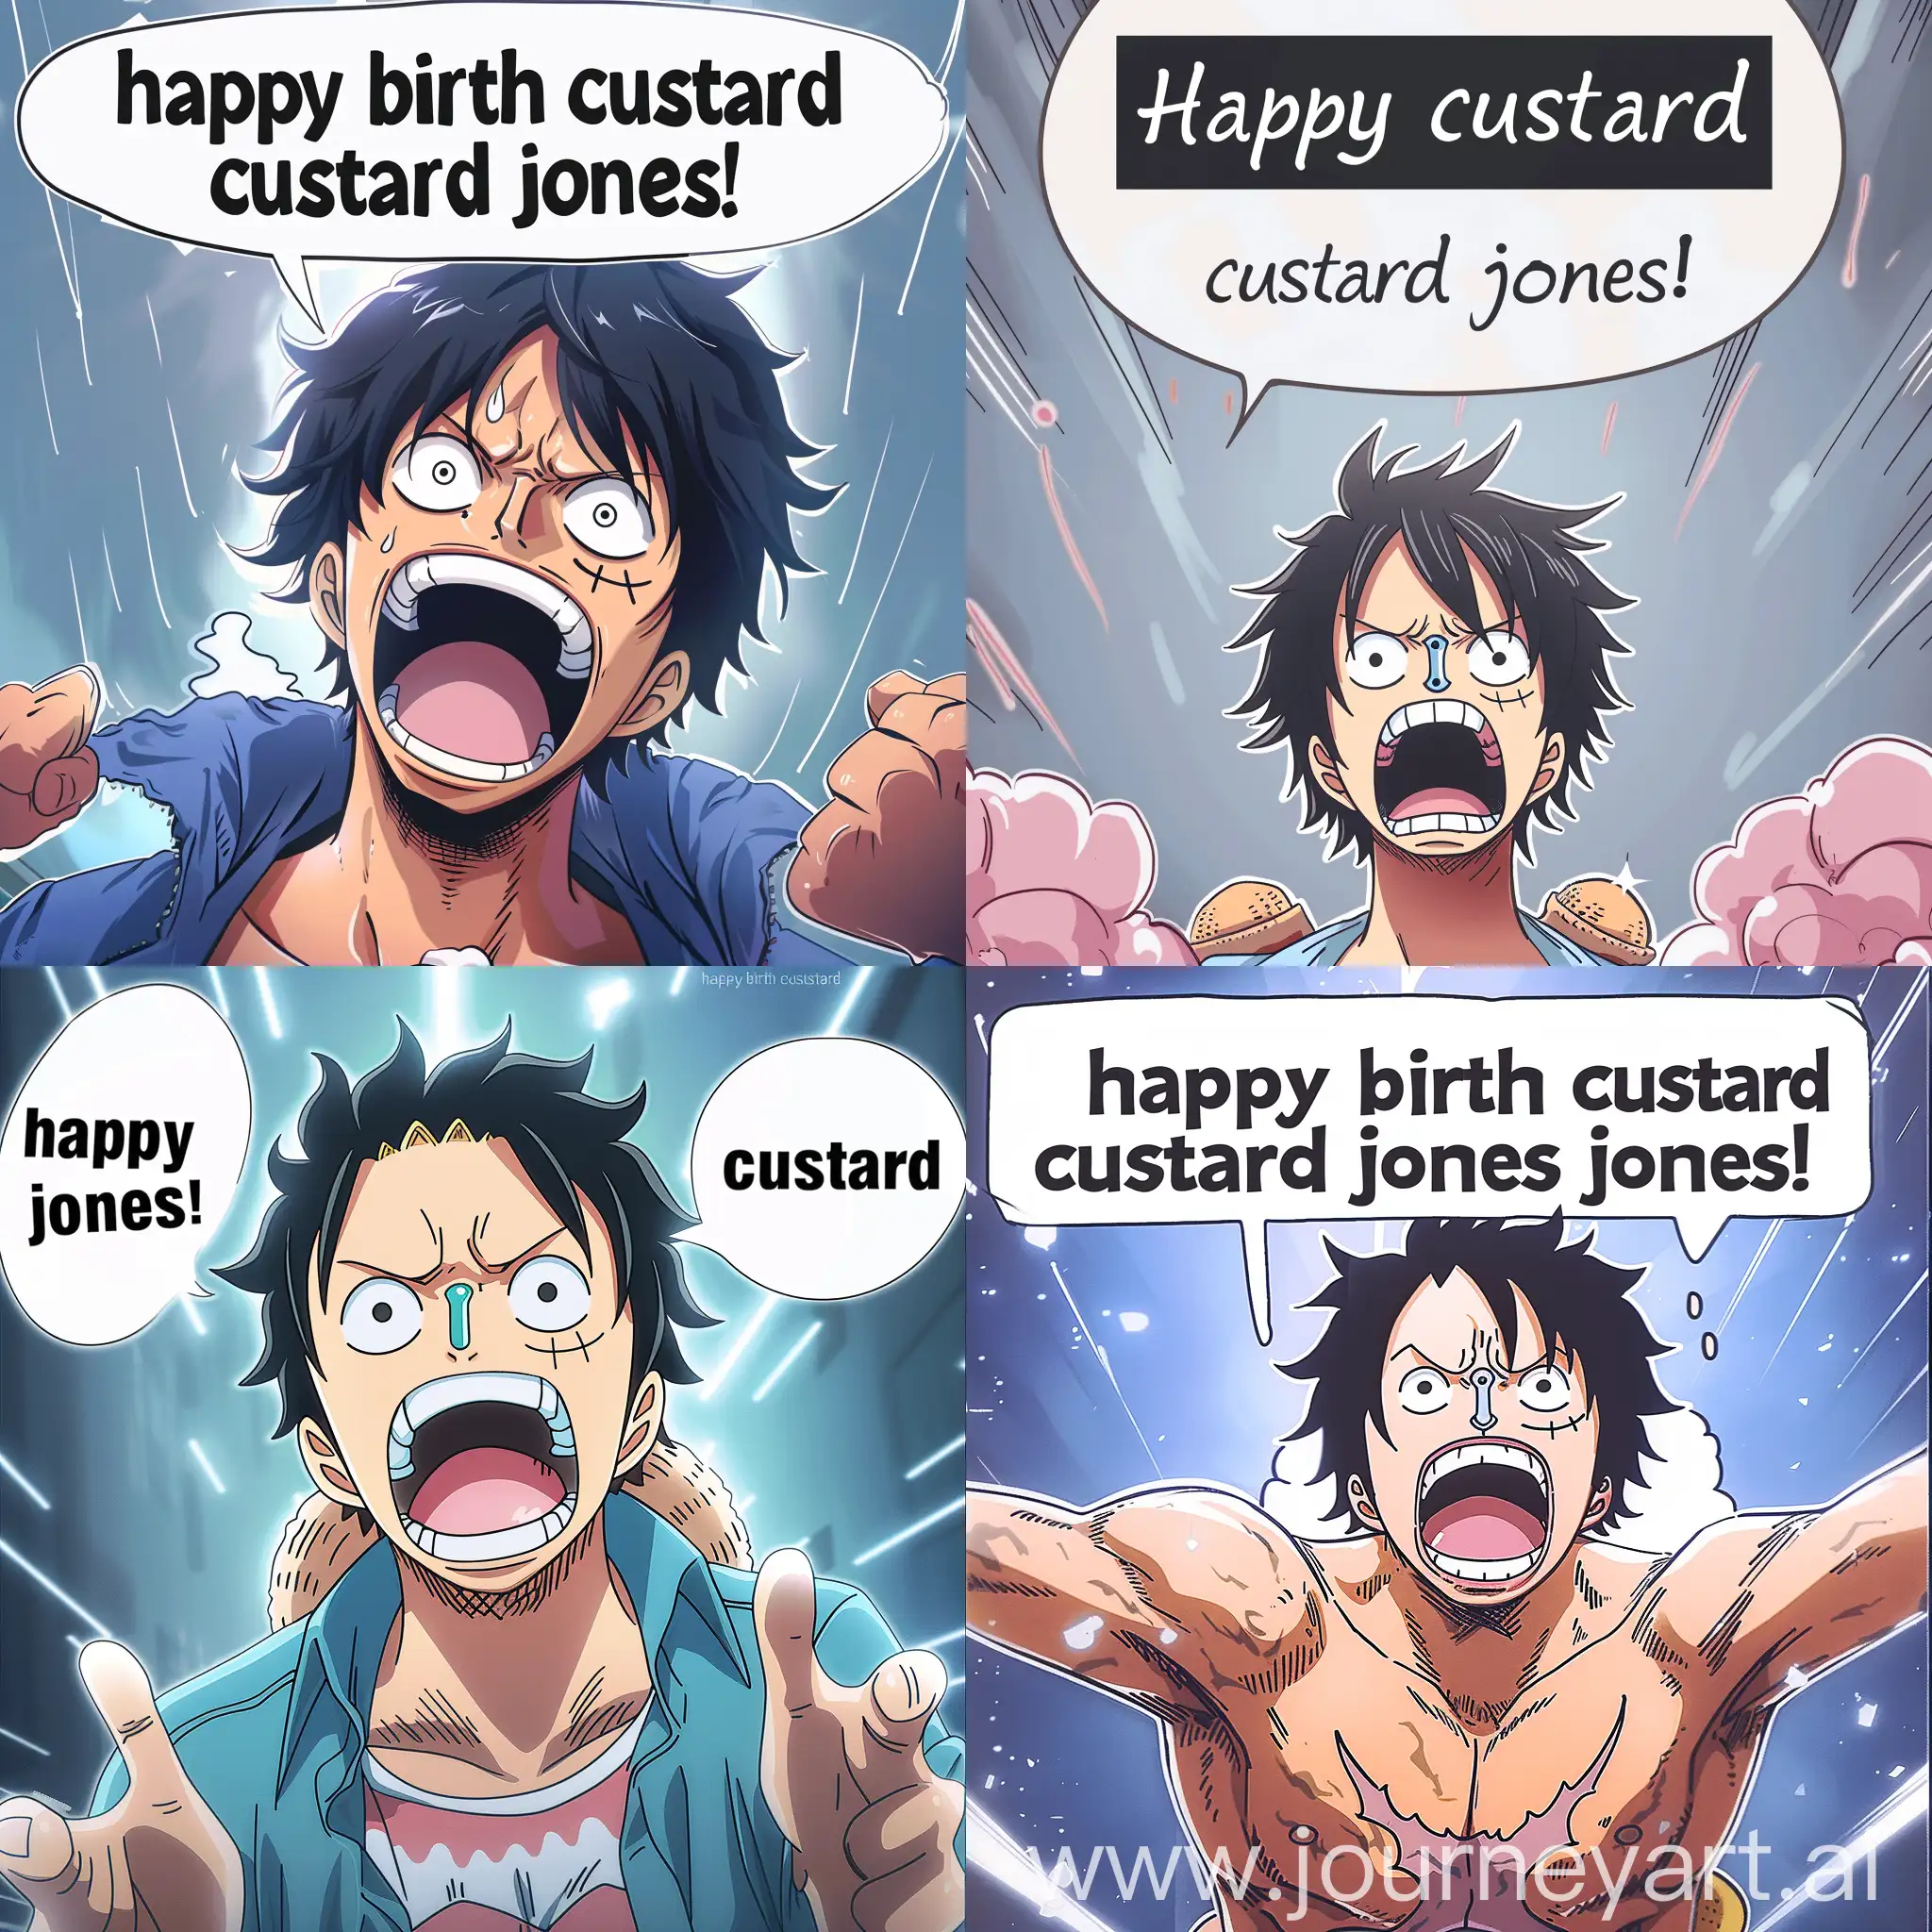 Luffi (from One Piece) shouting, with text in a bubble above him, text: “happy birth custard jones!”, funny, anime